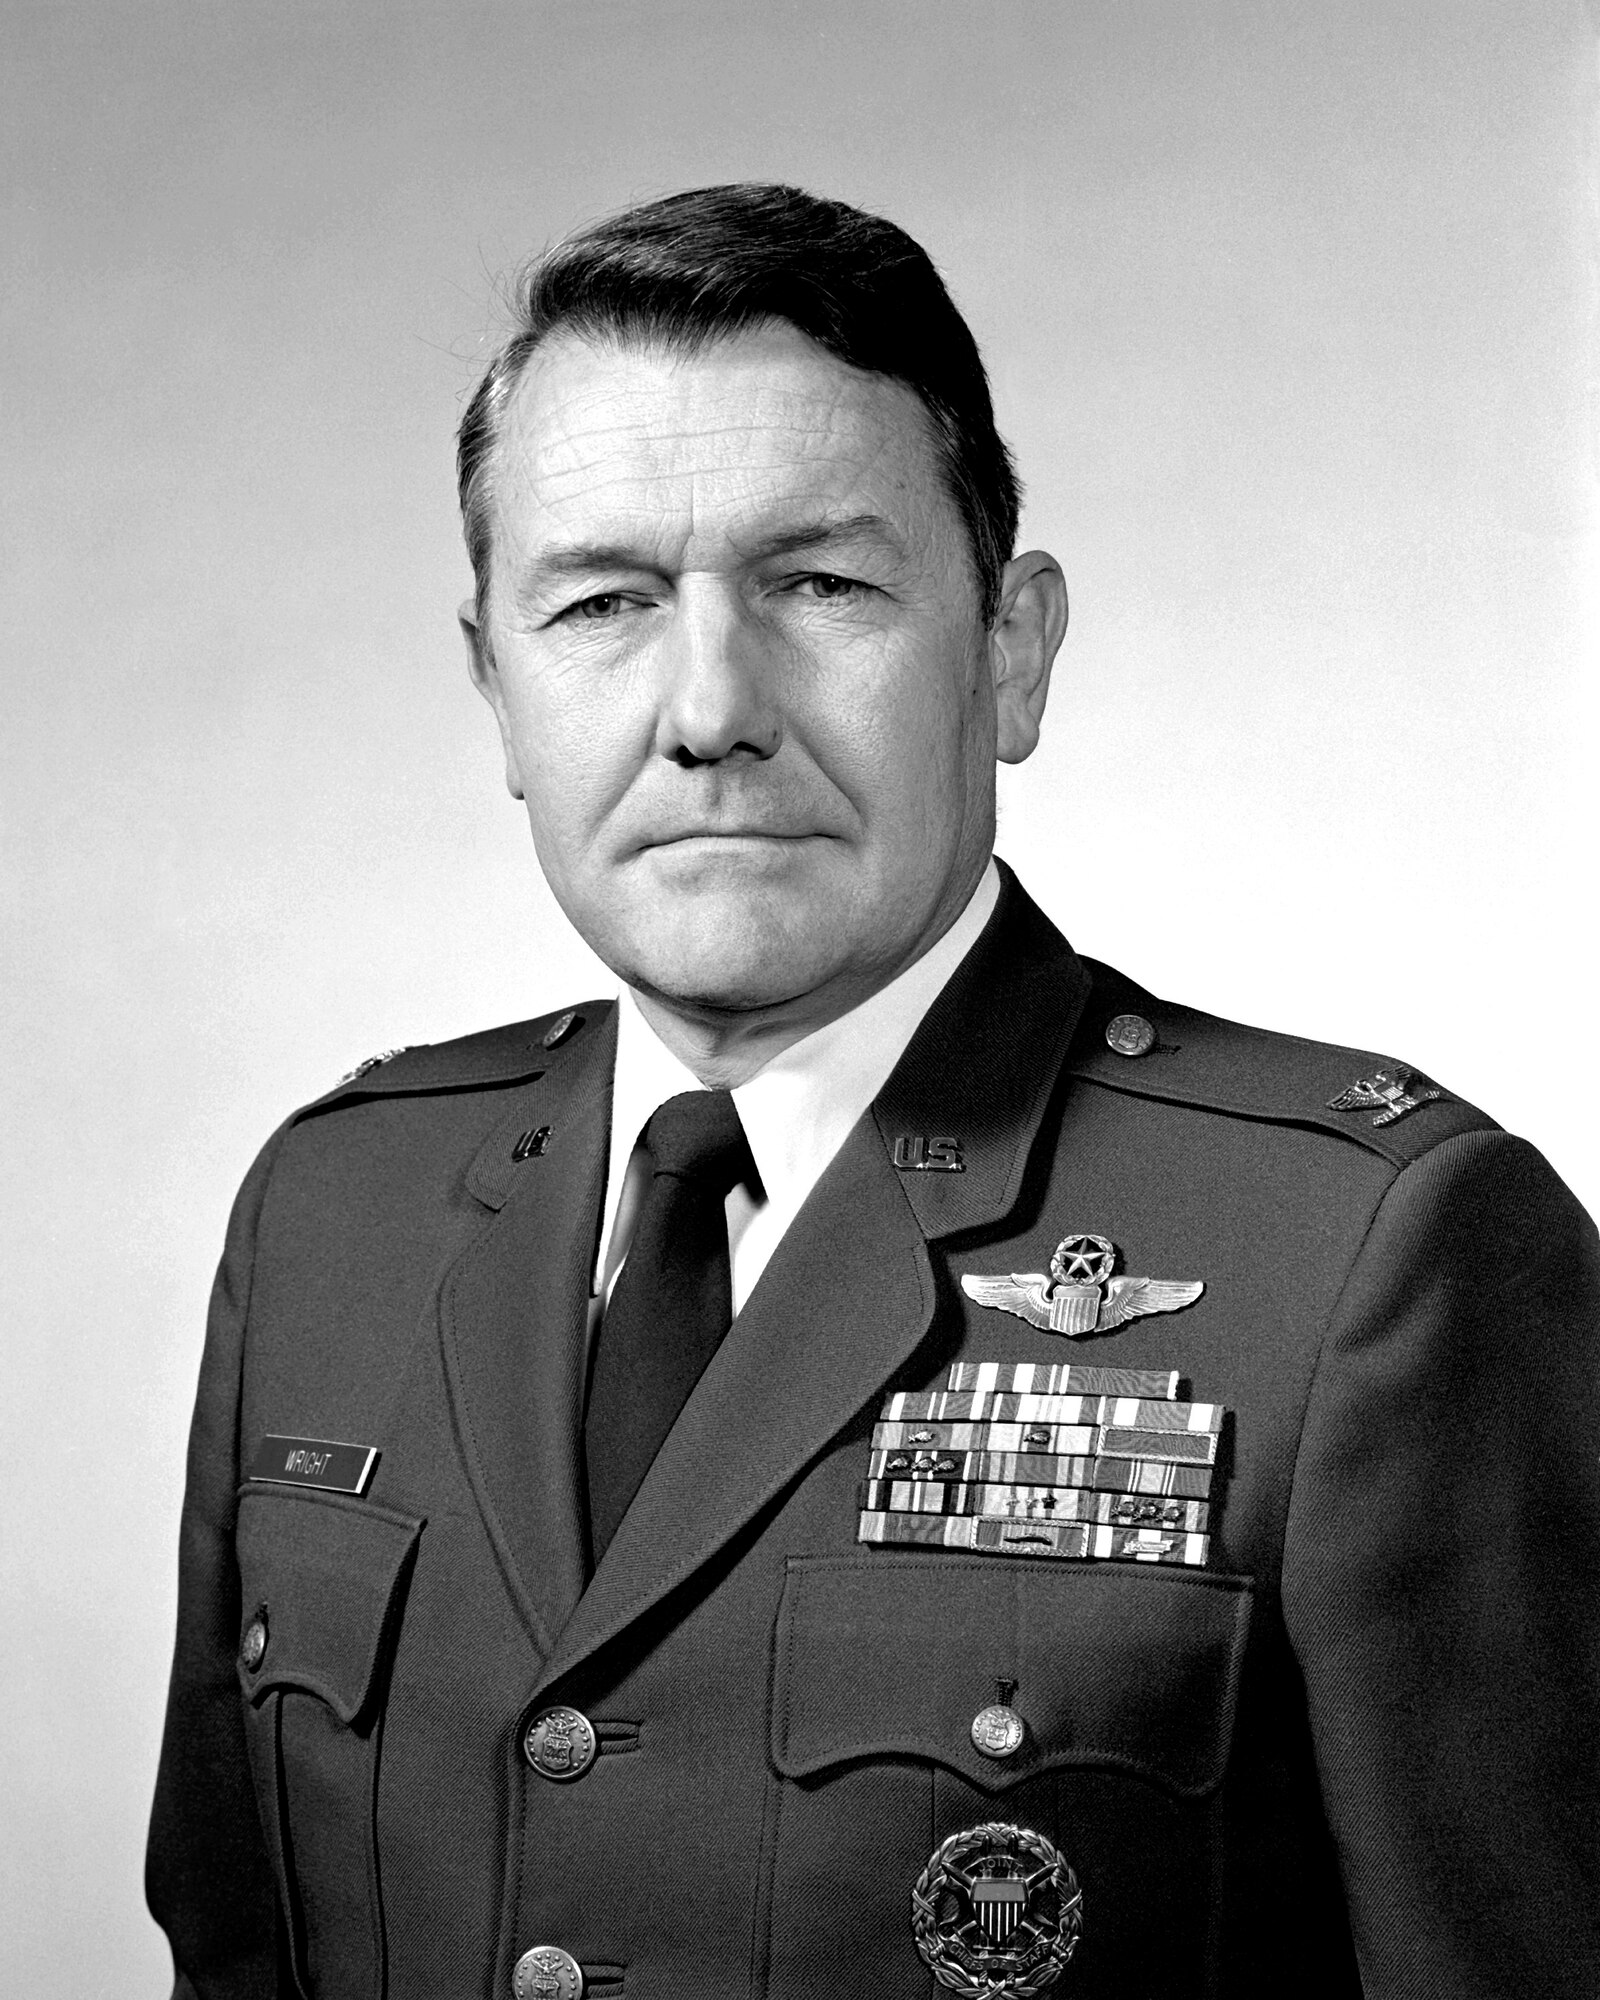 A man in service dress uniform poses for an official photo.